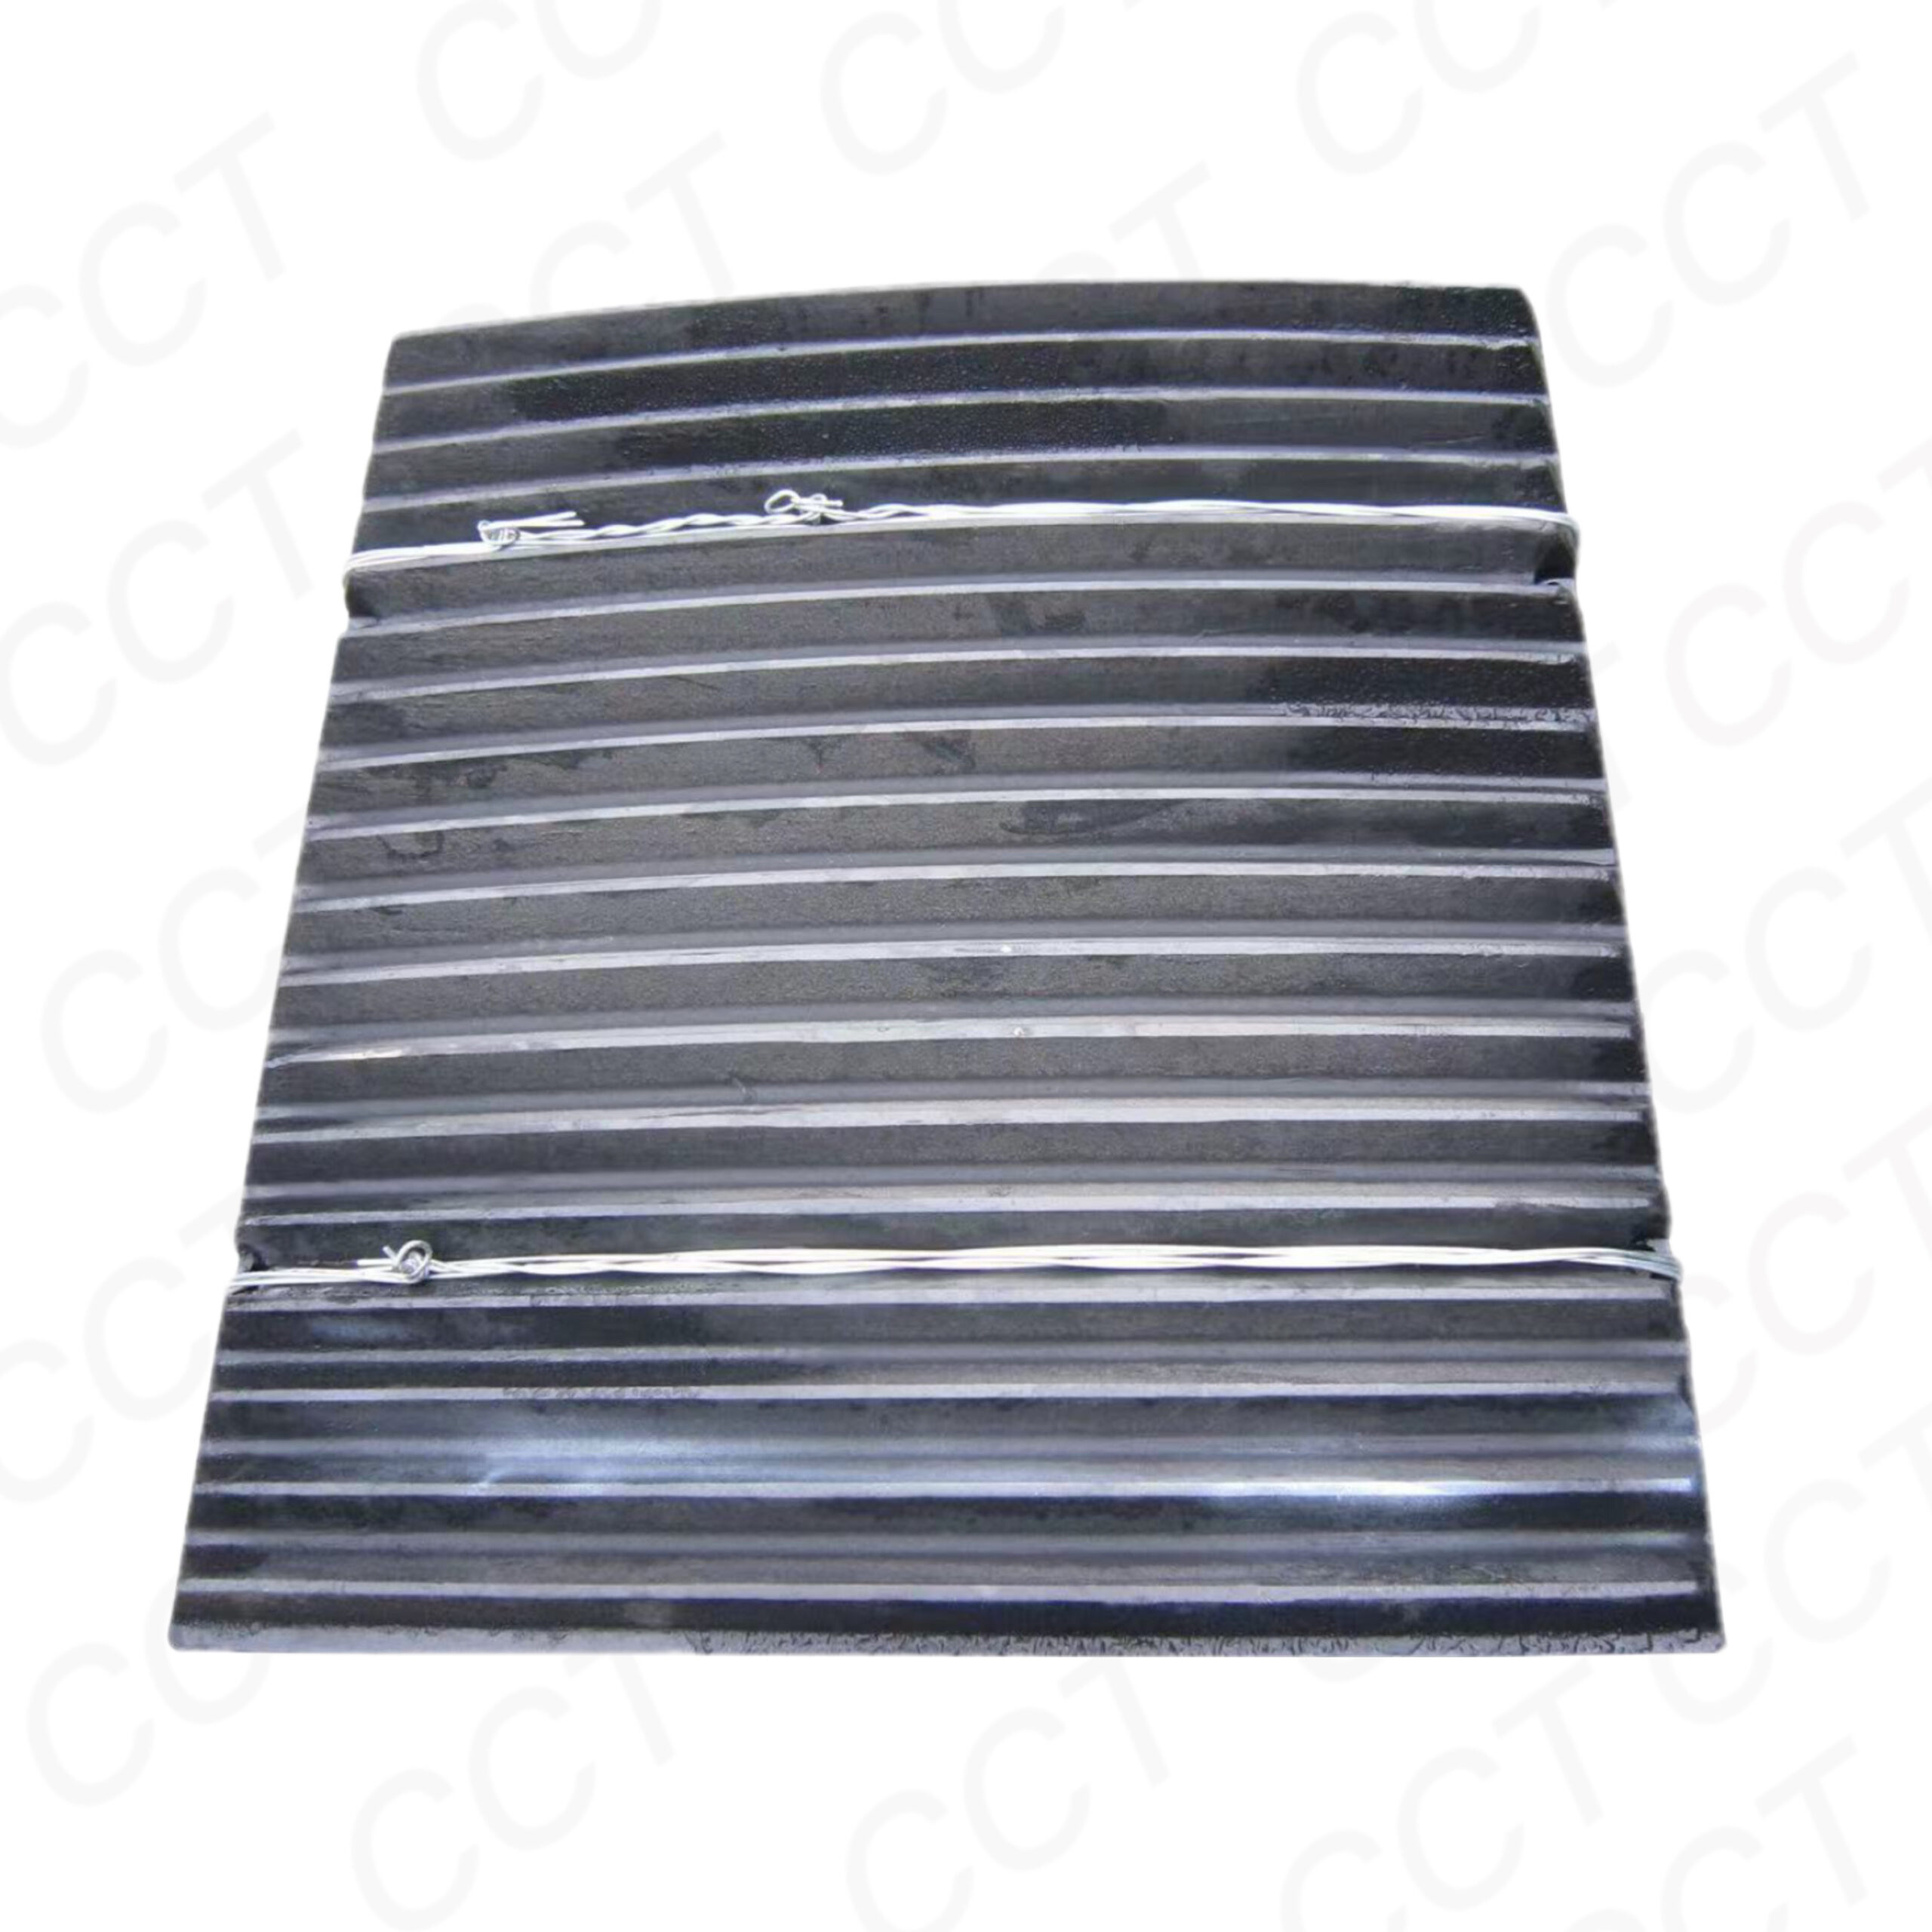 Jaw Plate CT-0012